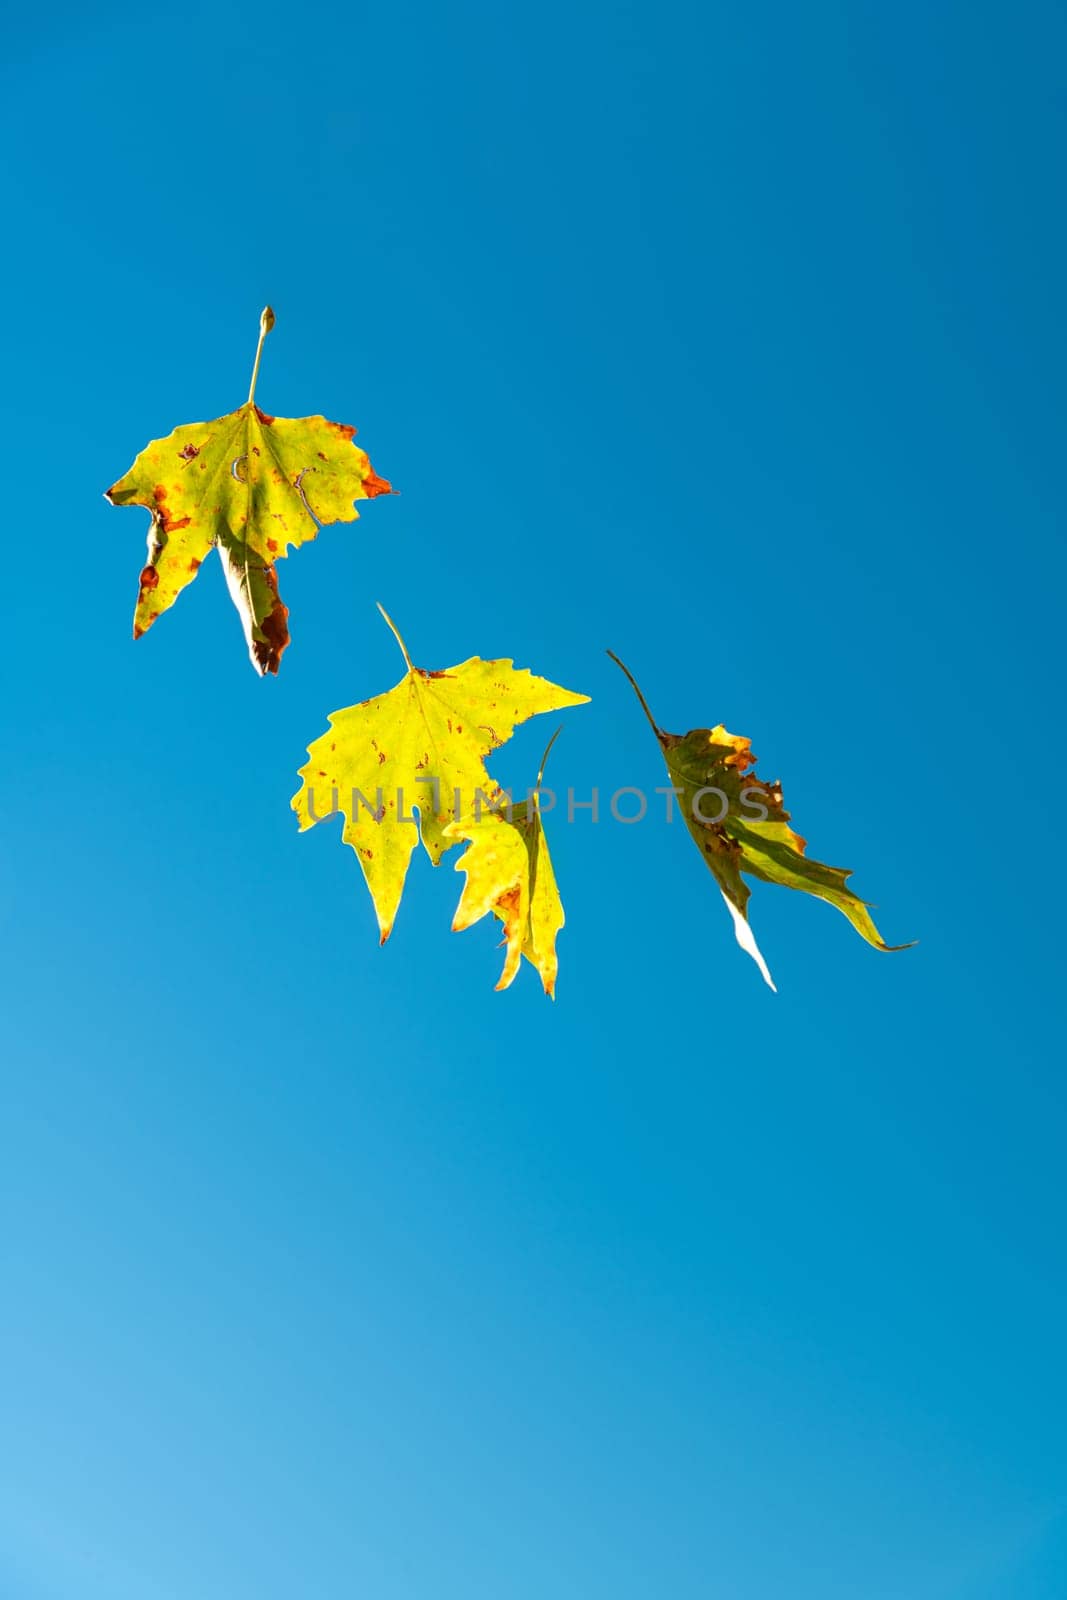 Yellowed leaves of plane tree in front of blue sunny sky in autumn by Sonat